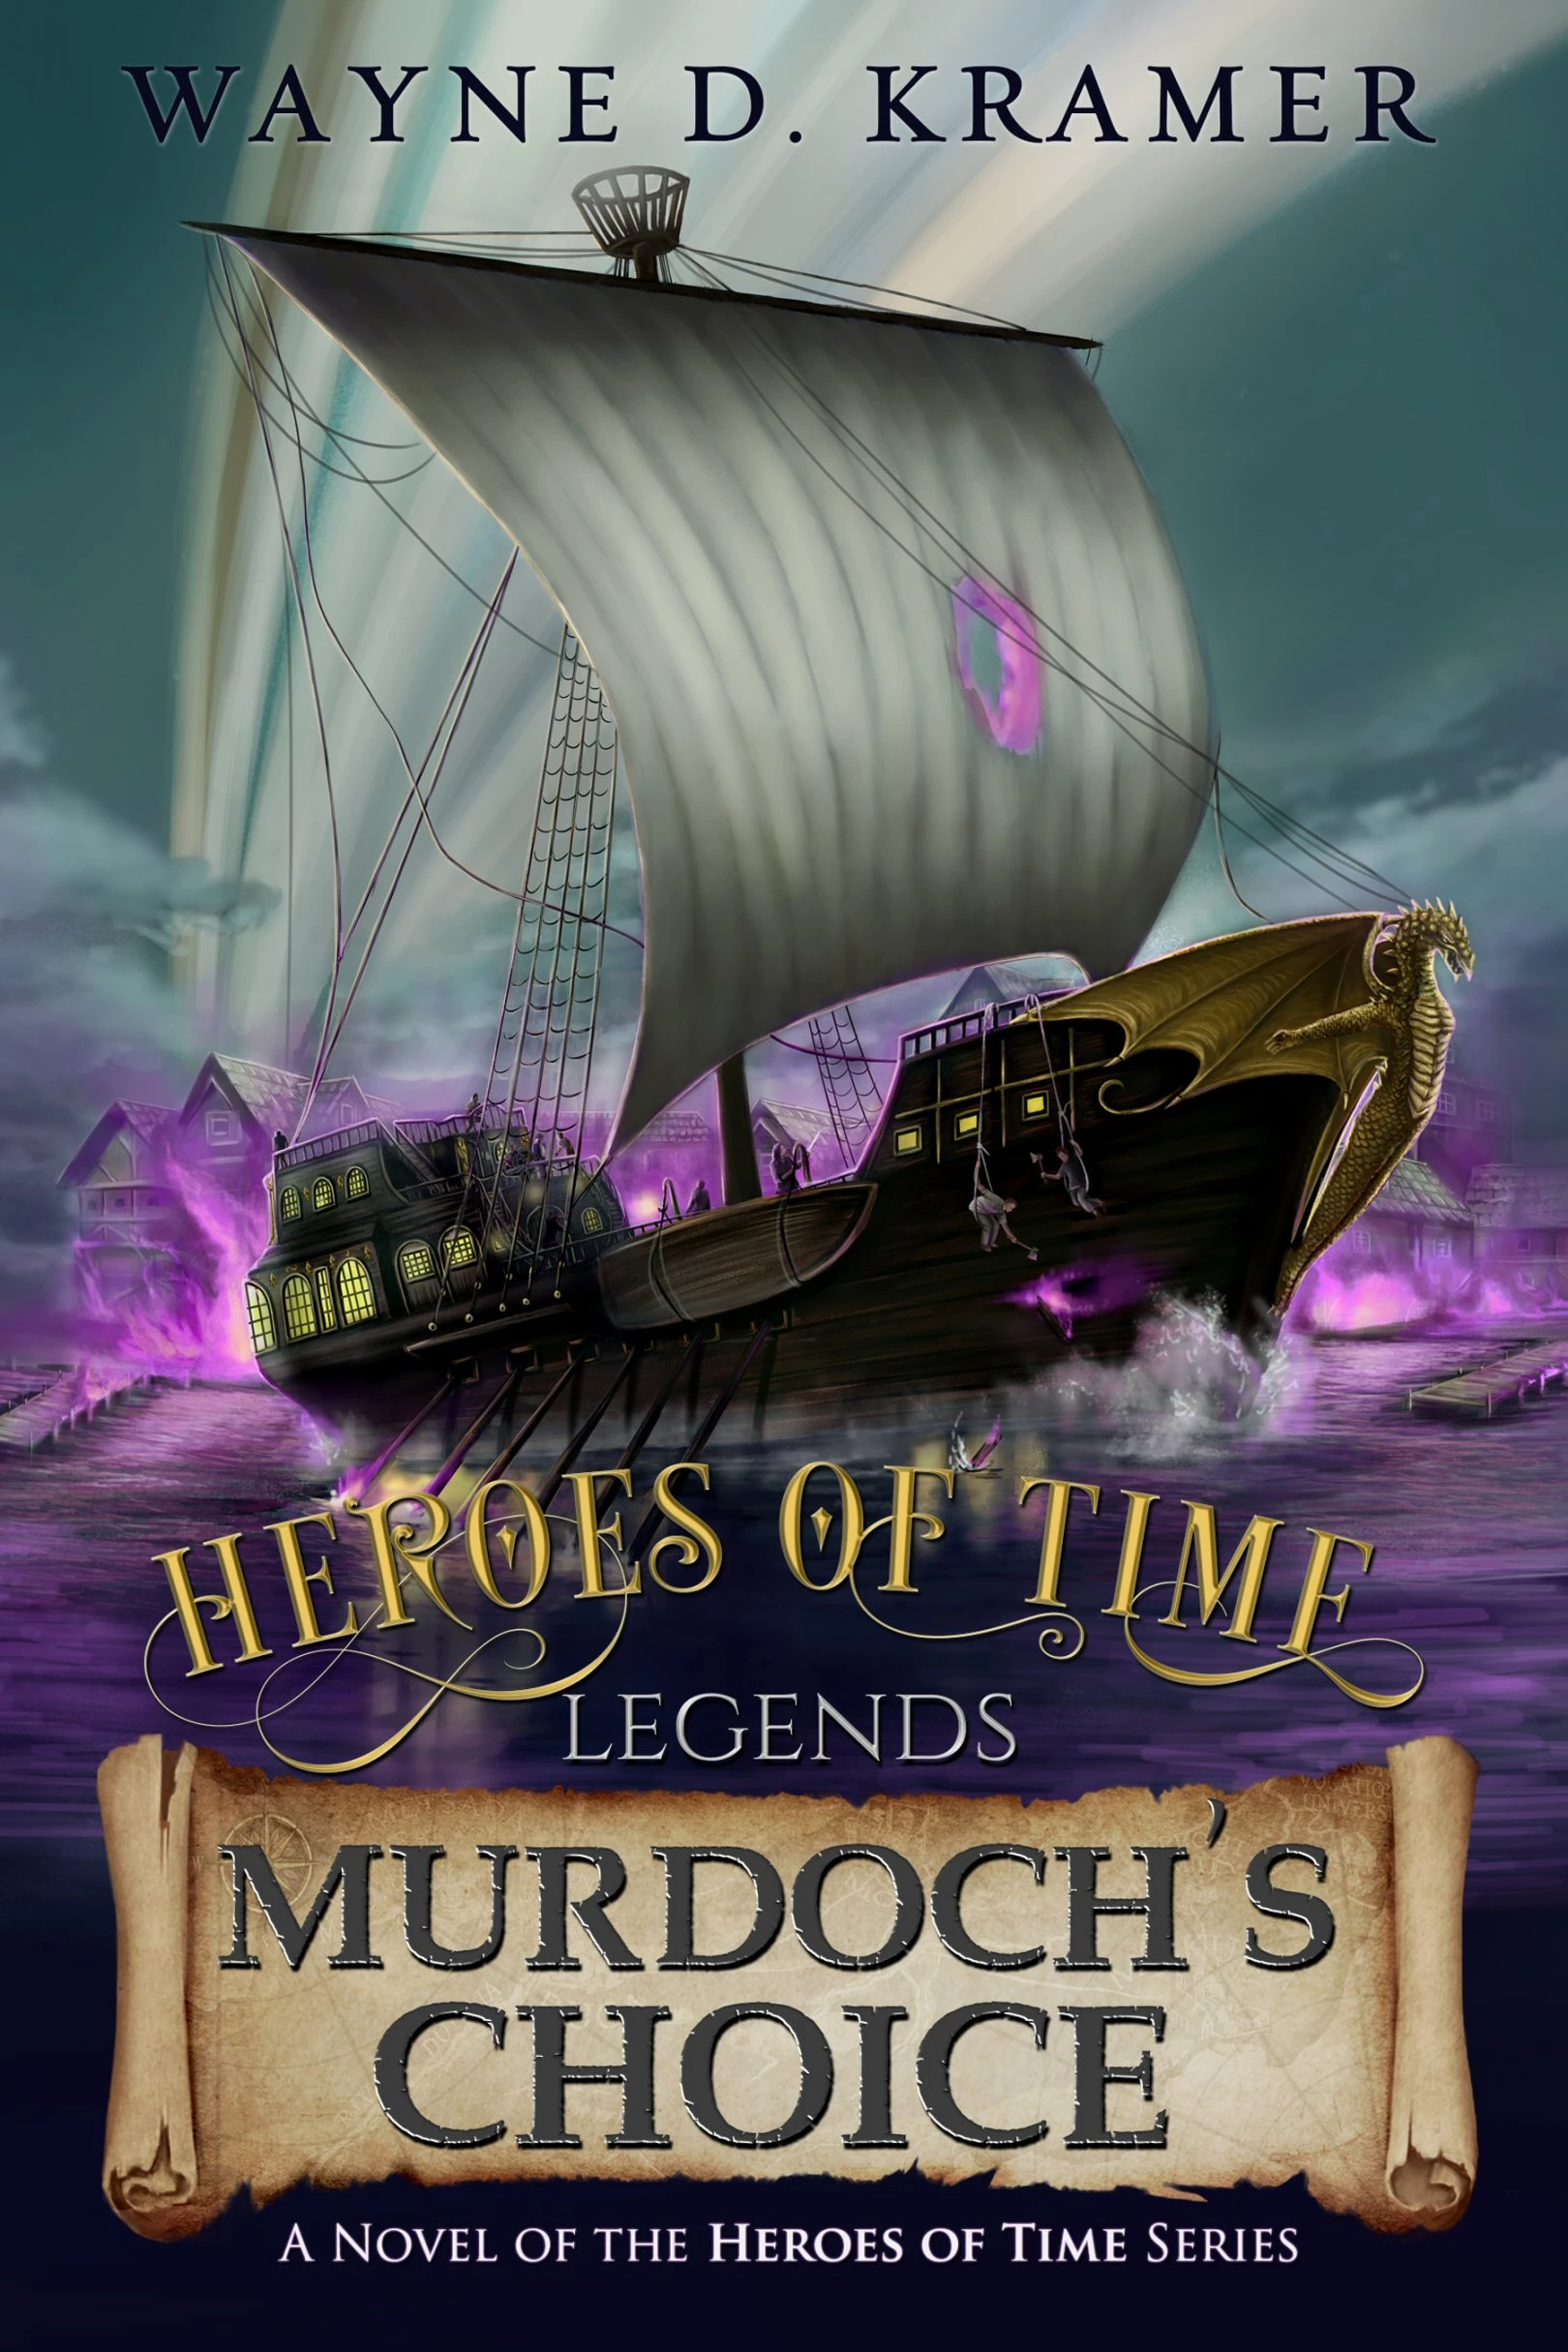 Heroes of Time Legends: Murdoch’s Choice